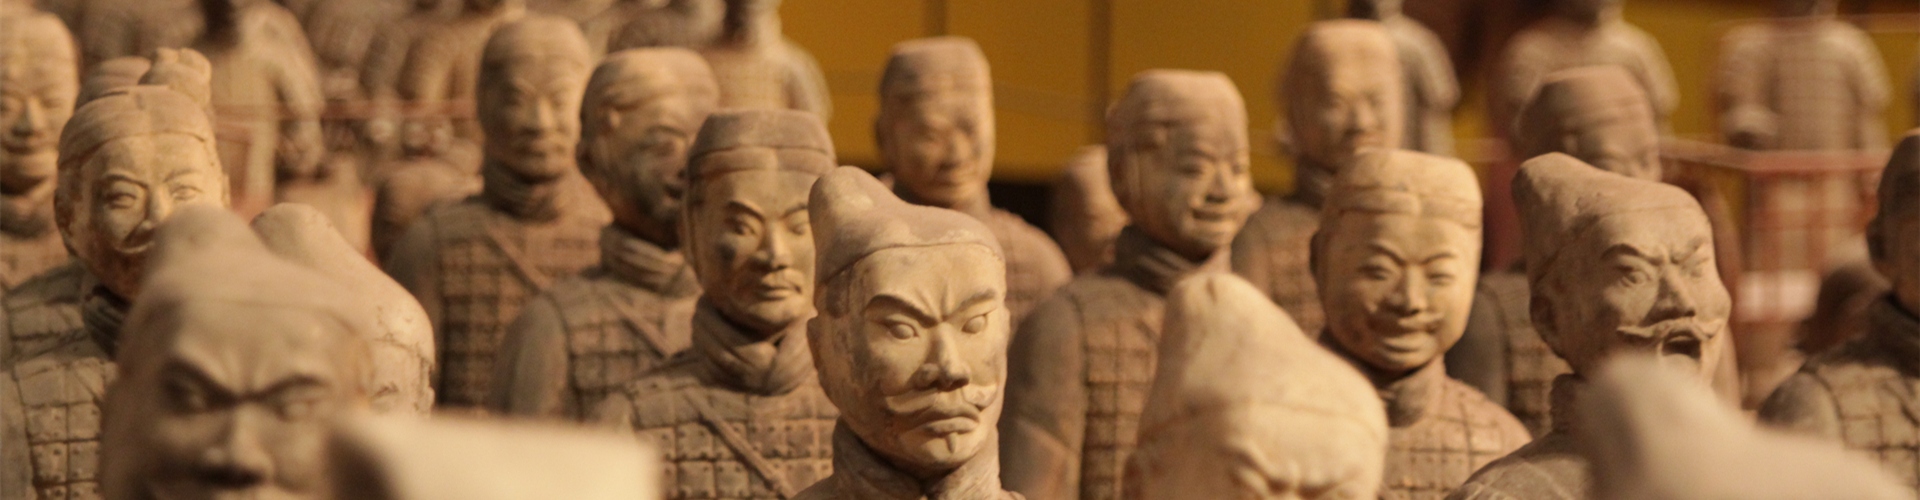 5 Differences Between the Terracotta Army and the Tomb of Emperor Jingdi